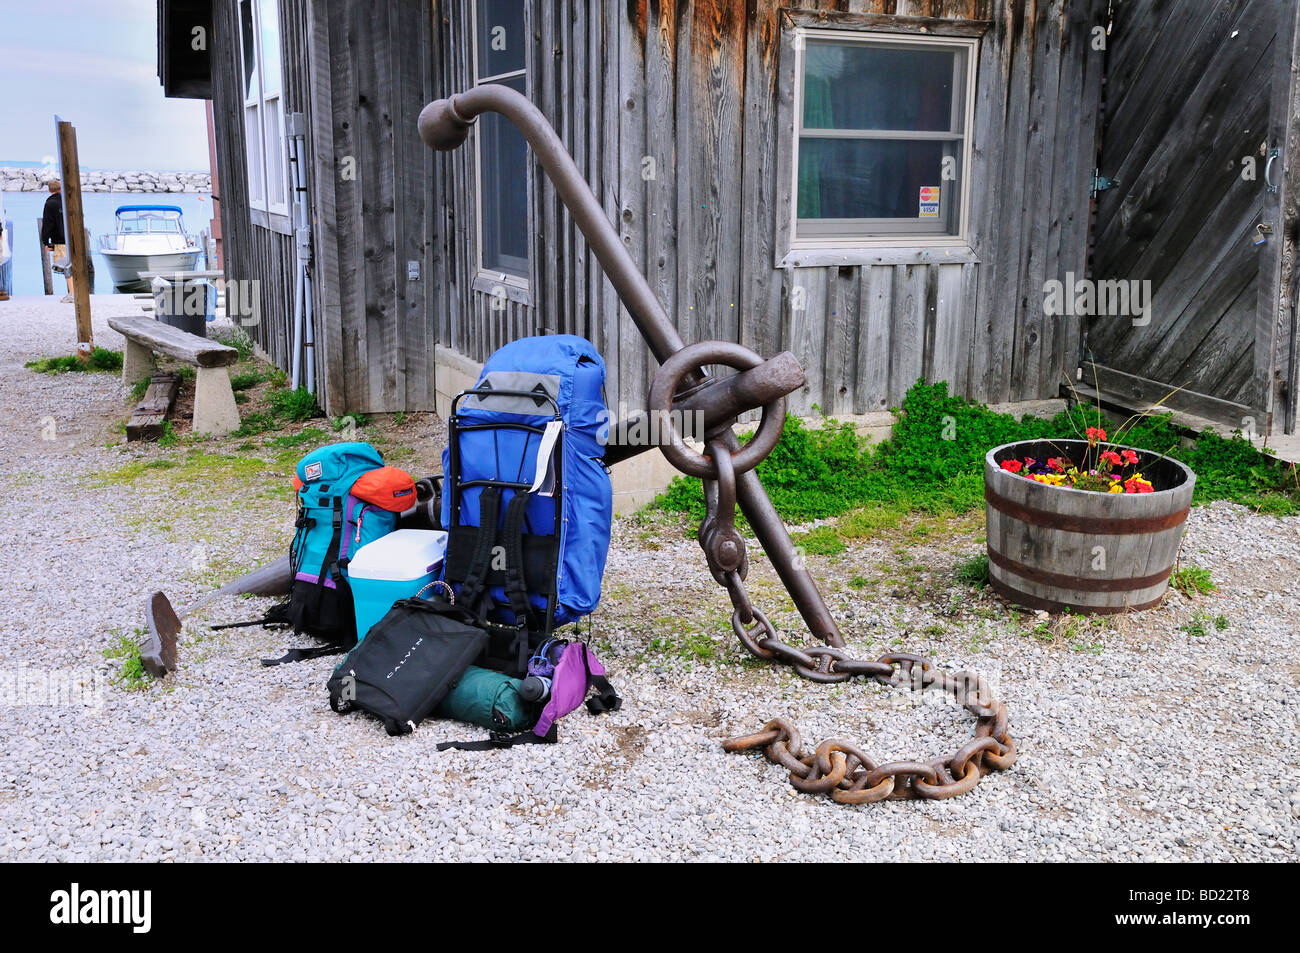 https://c8.alamy.com/comp/BD22T8/camping-gear-placed-next-to-an-old-anchor-at-fishtown-in-the-town-BD22T8.jpg